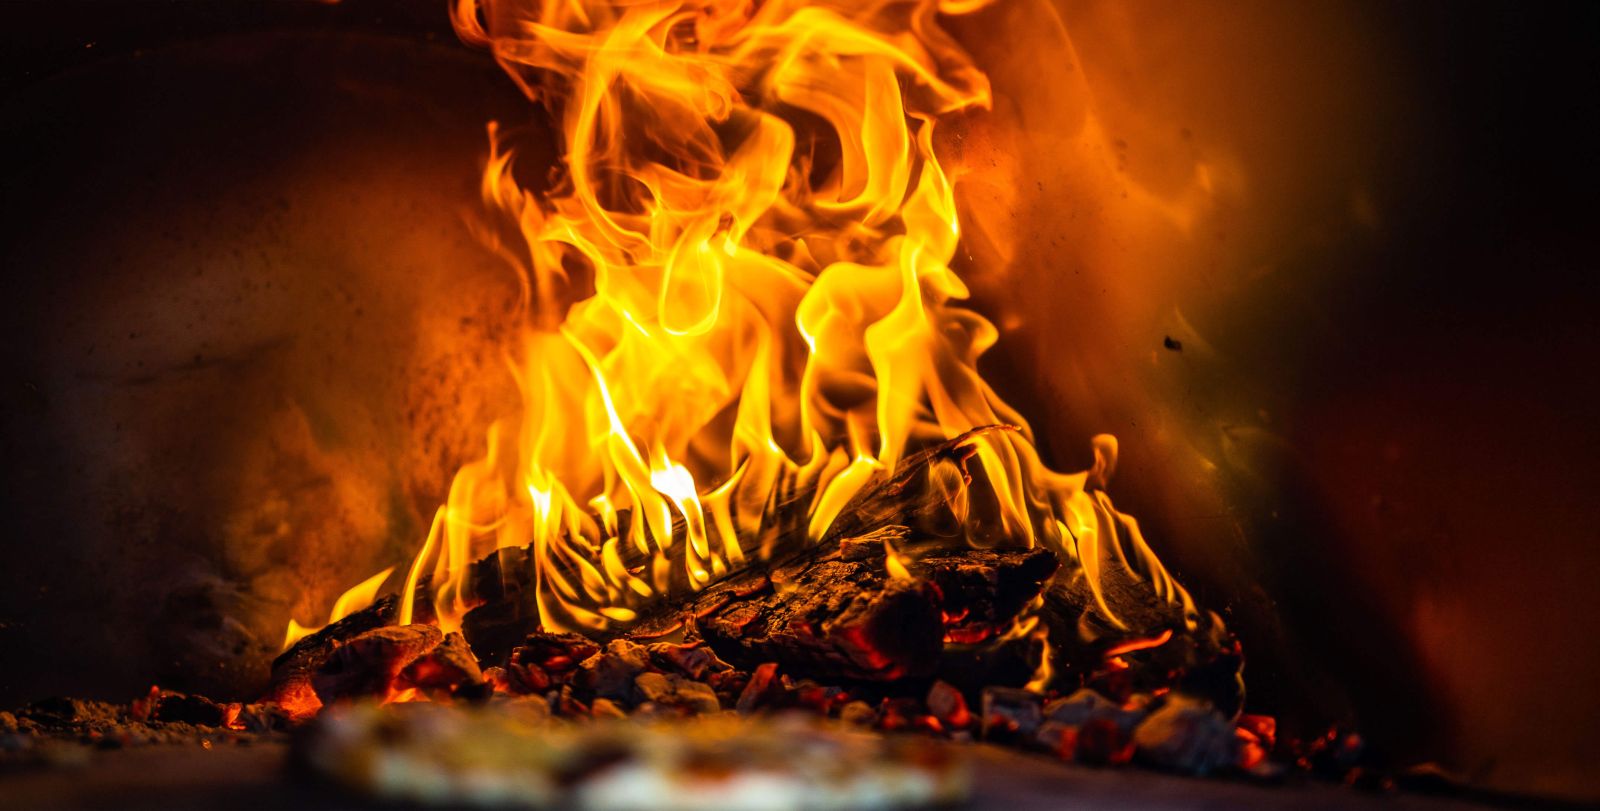 This image shows a pizza being cooked on hot surface of pizza oven